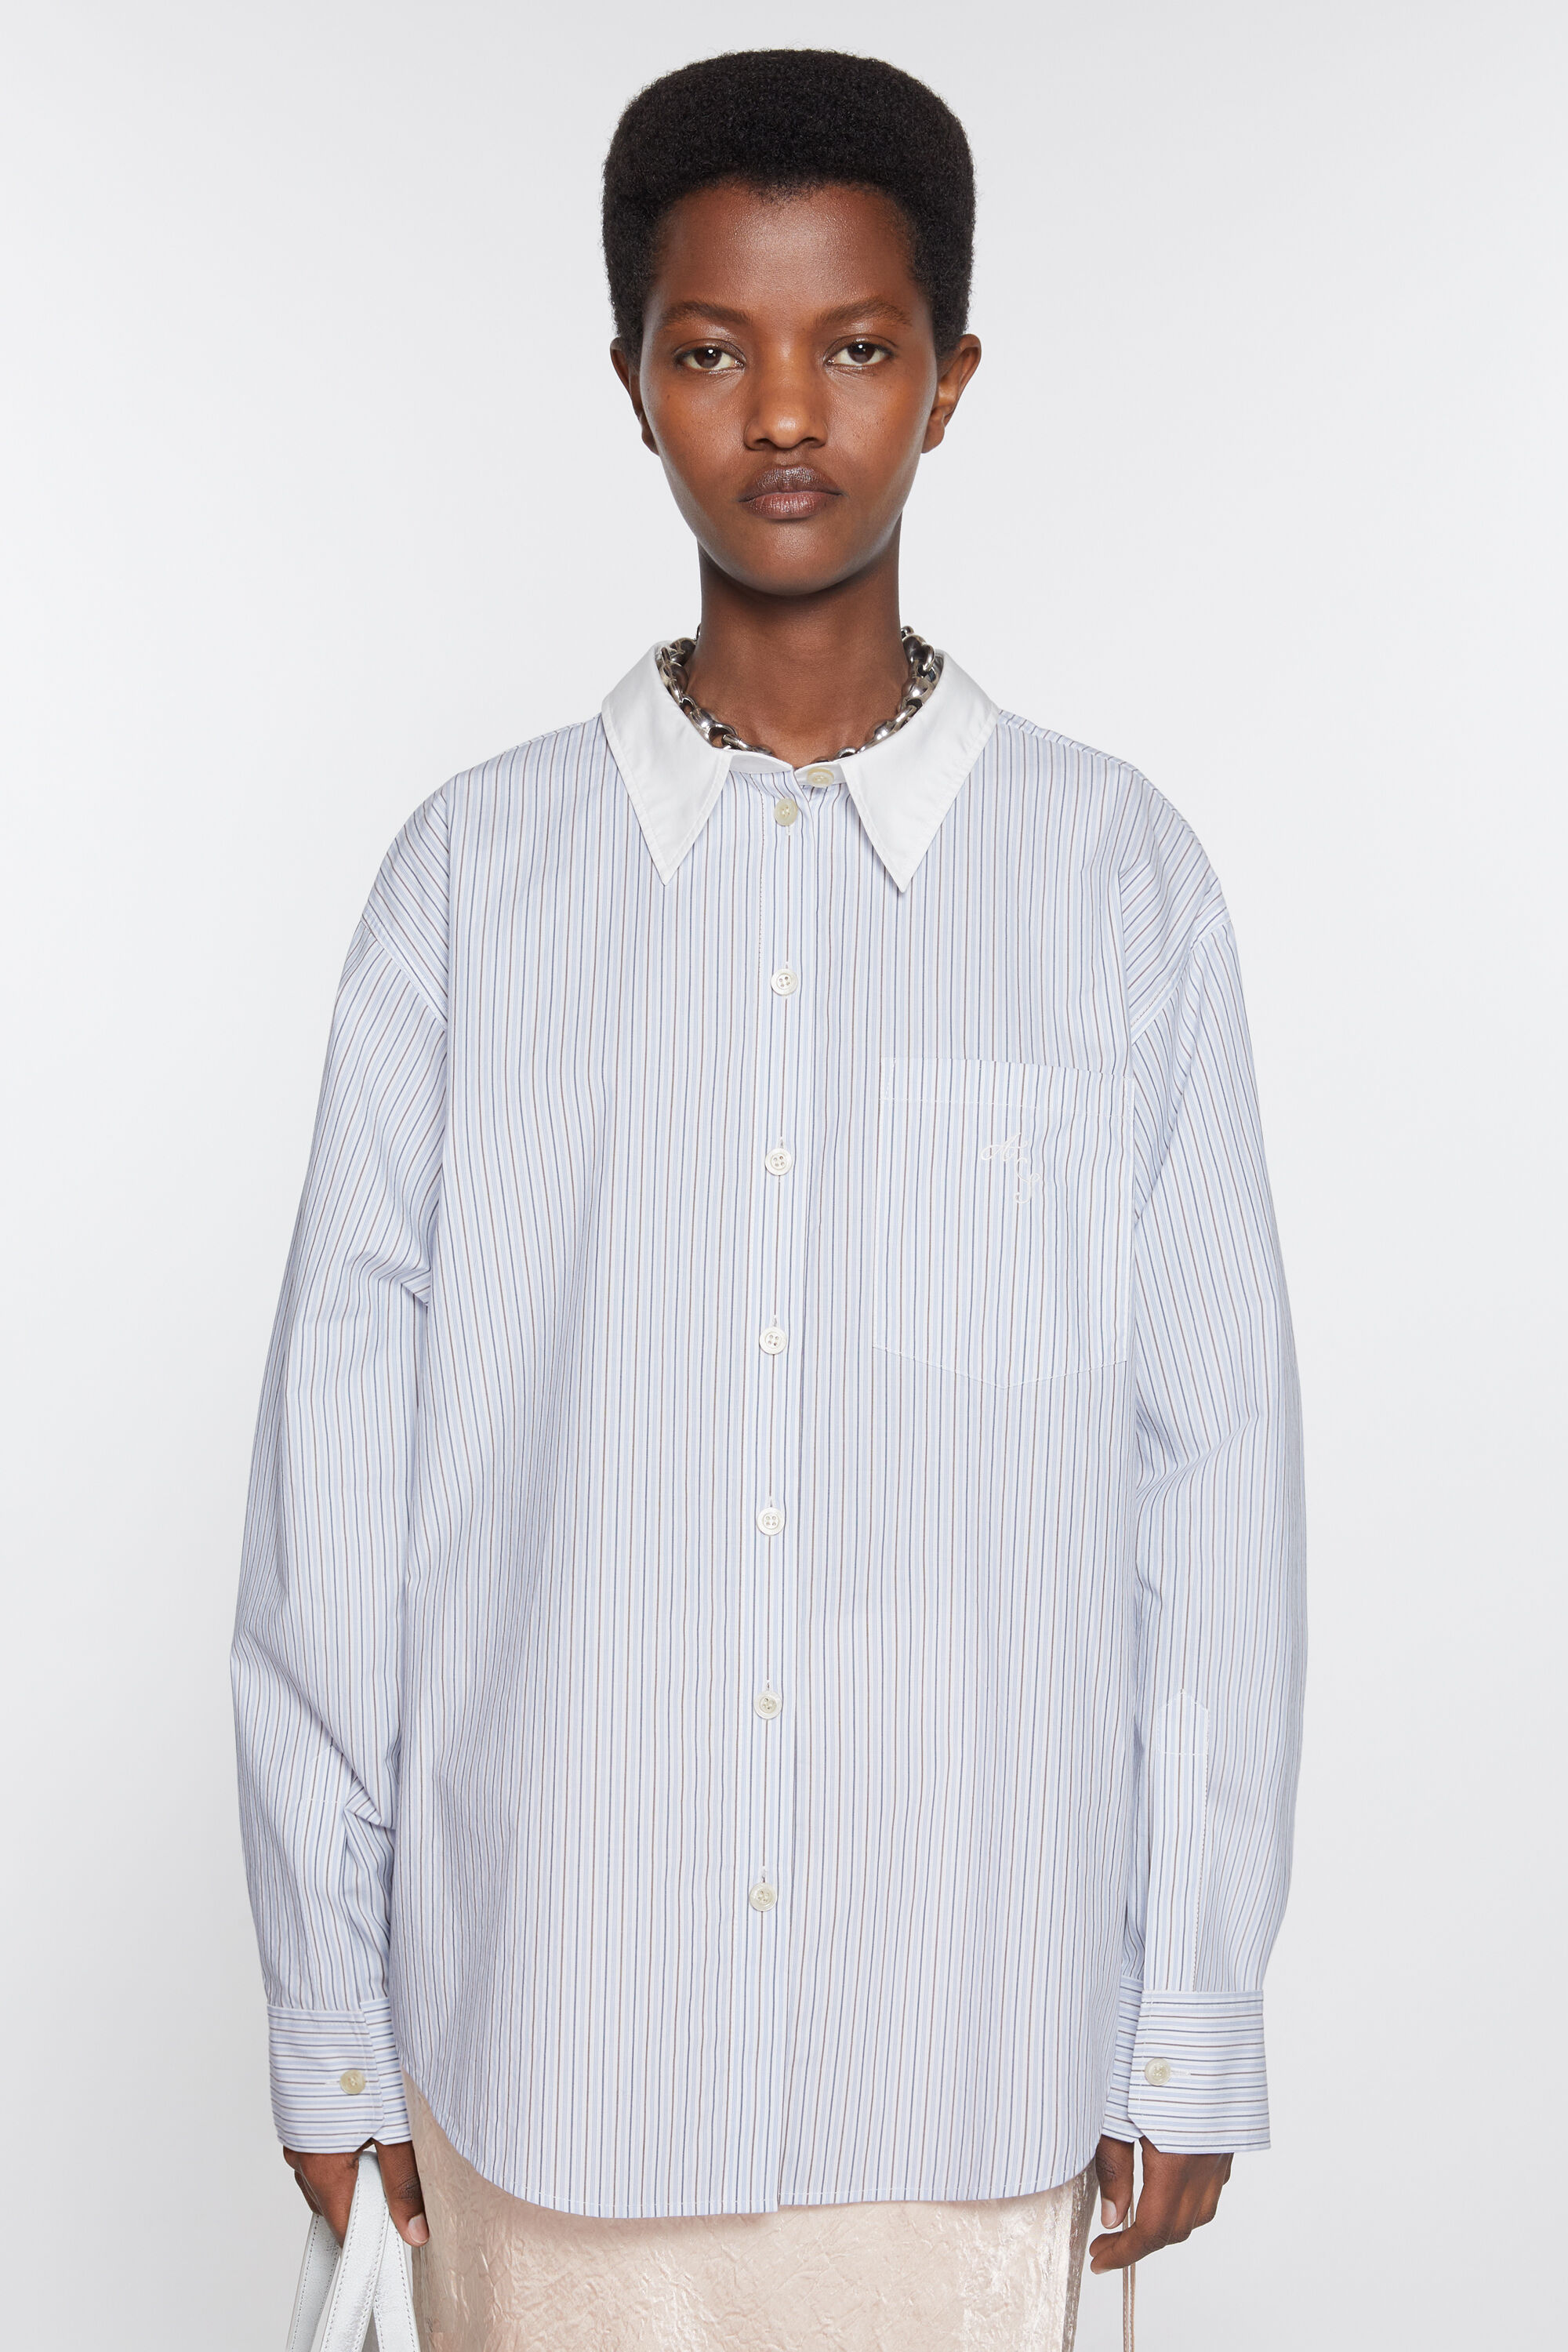 Acne Studios – Women's shirts and blouses